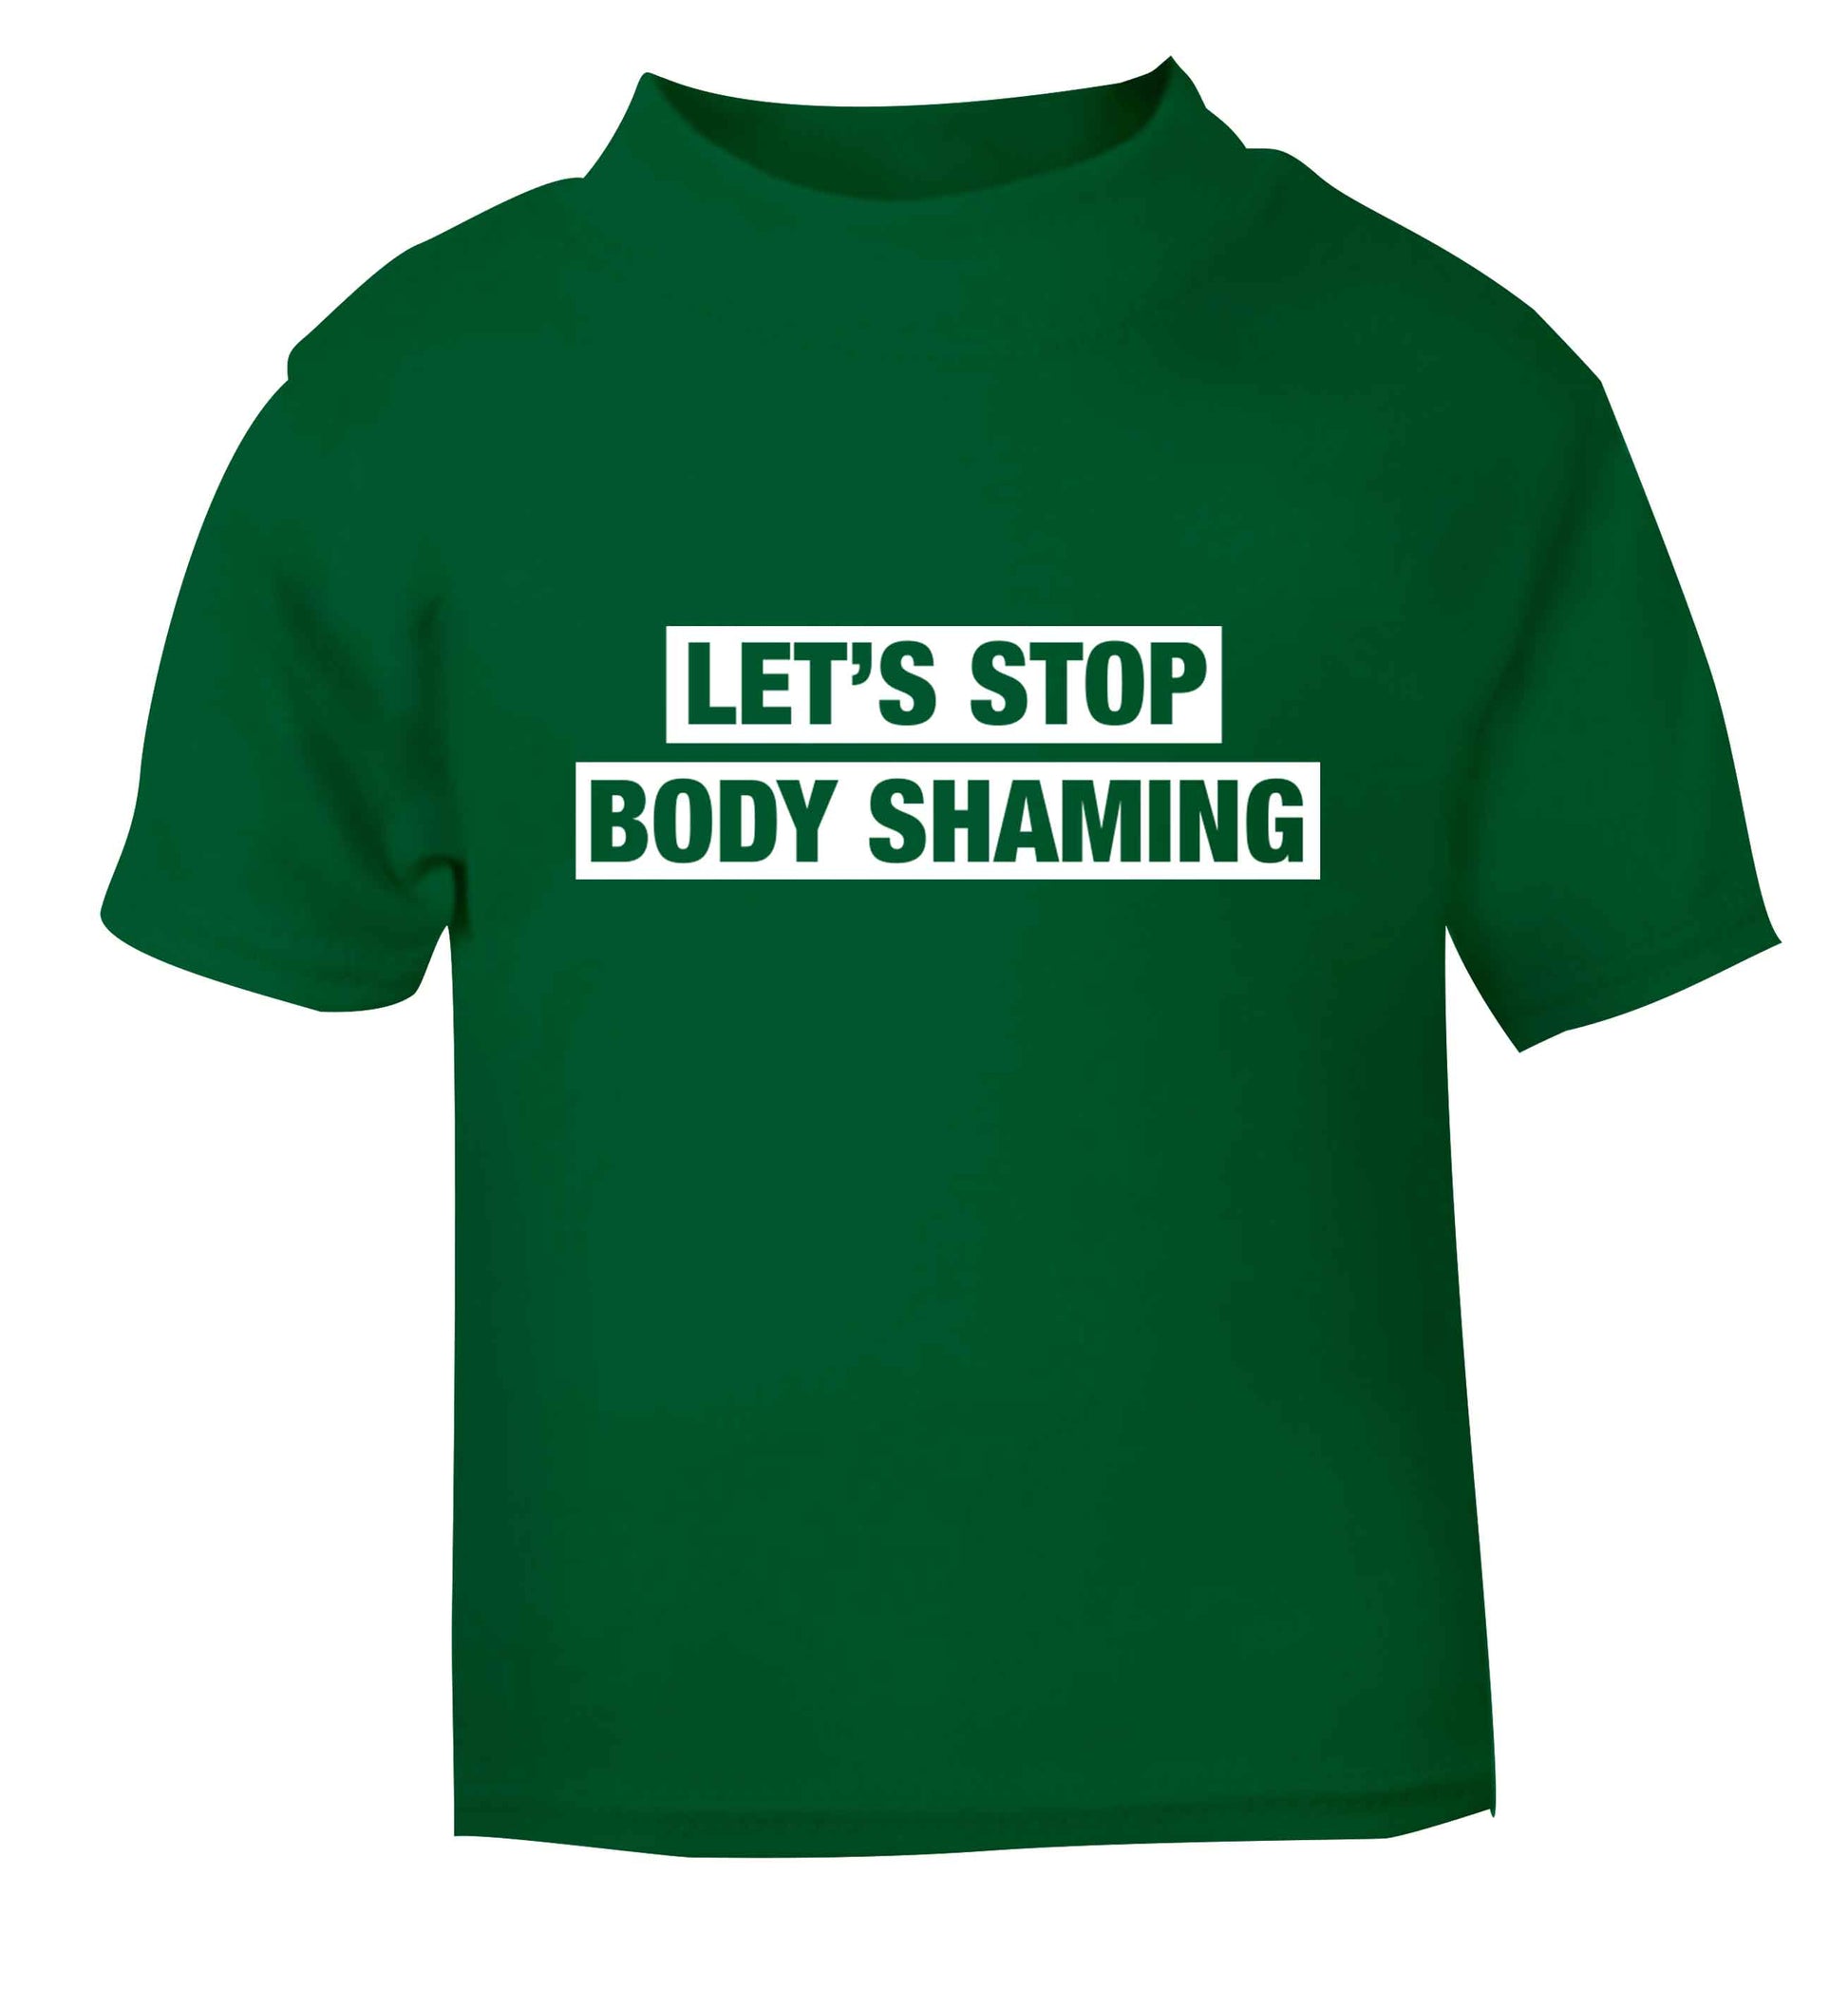 Let's stop body shaming green baby toddler Tshirt 2 Years